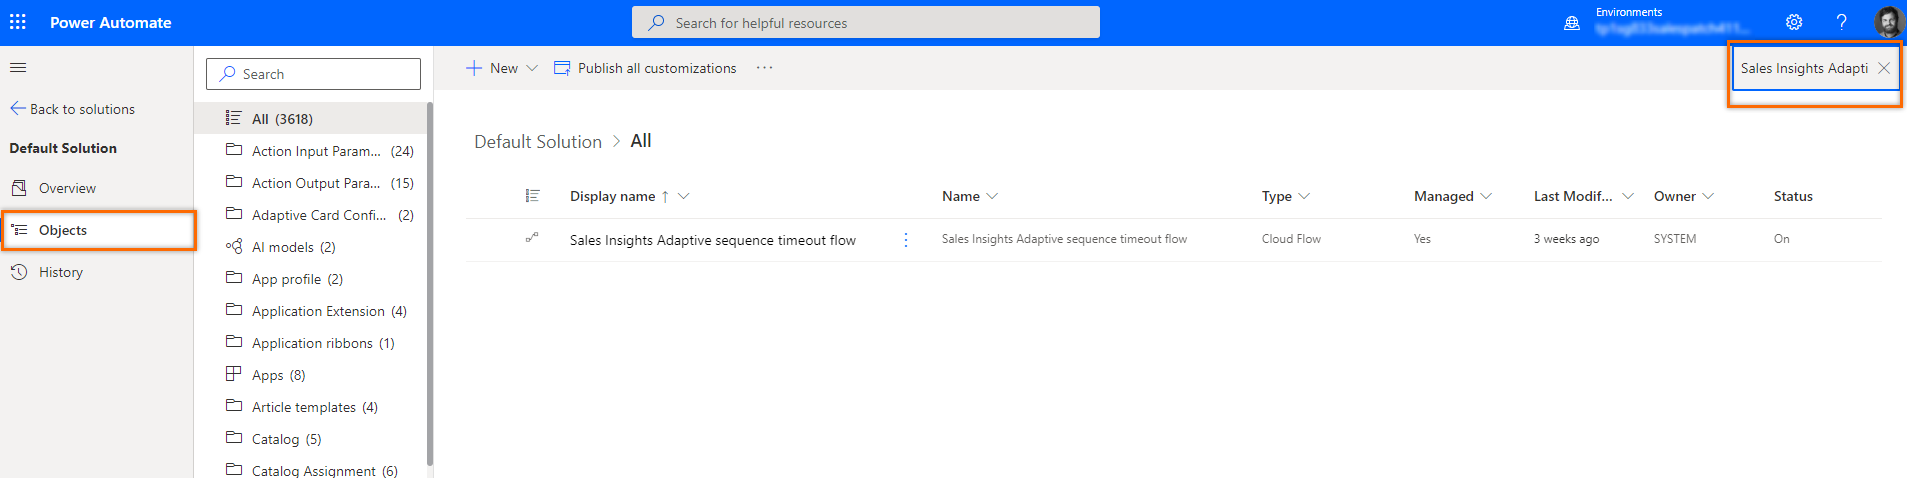 Search and select Sales Insights Adaptive sequence timeout flow